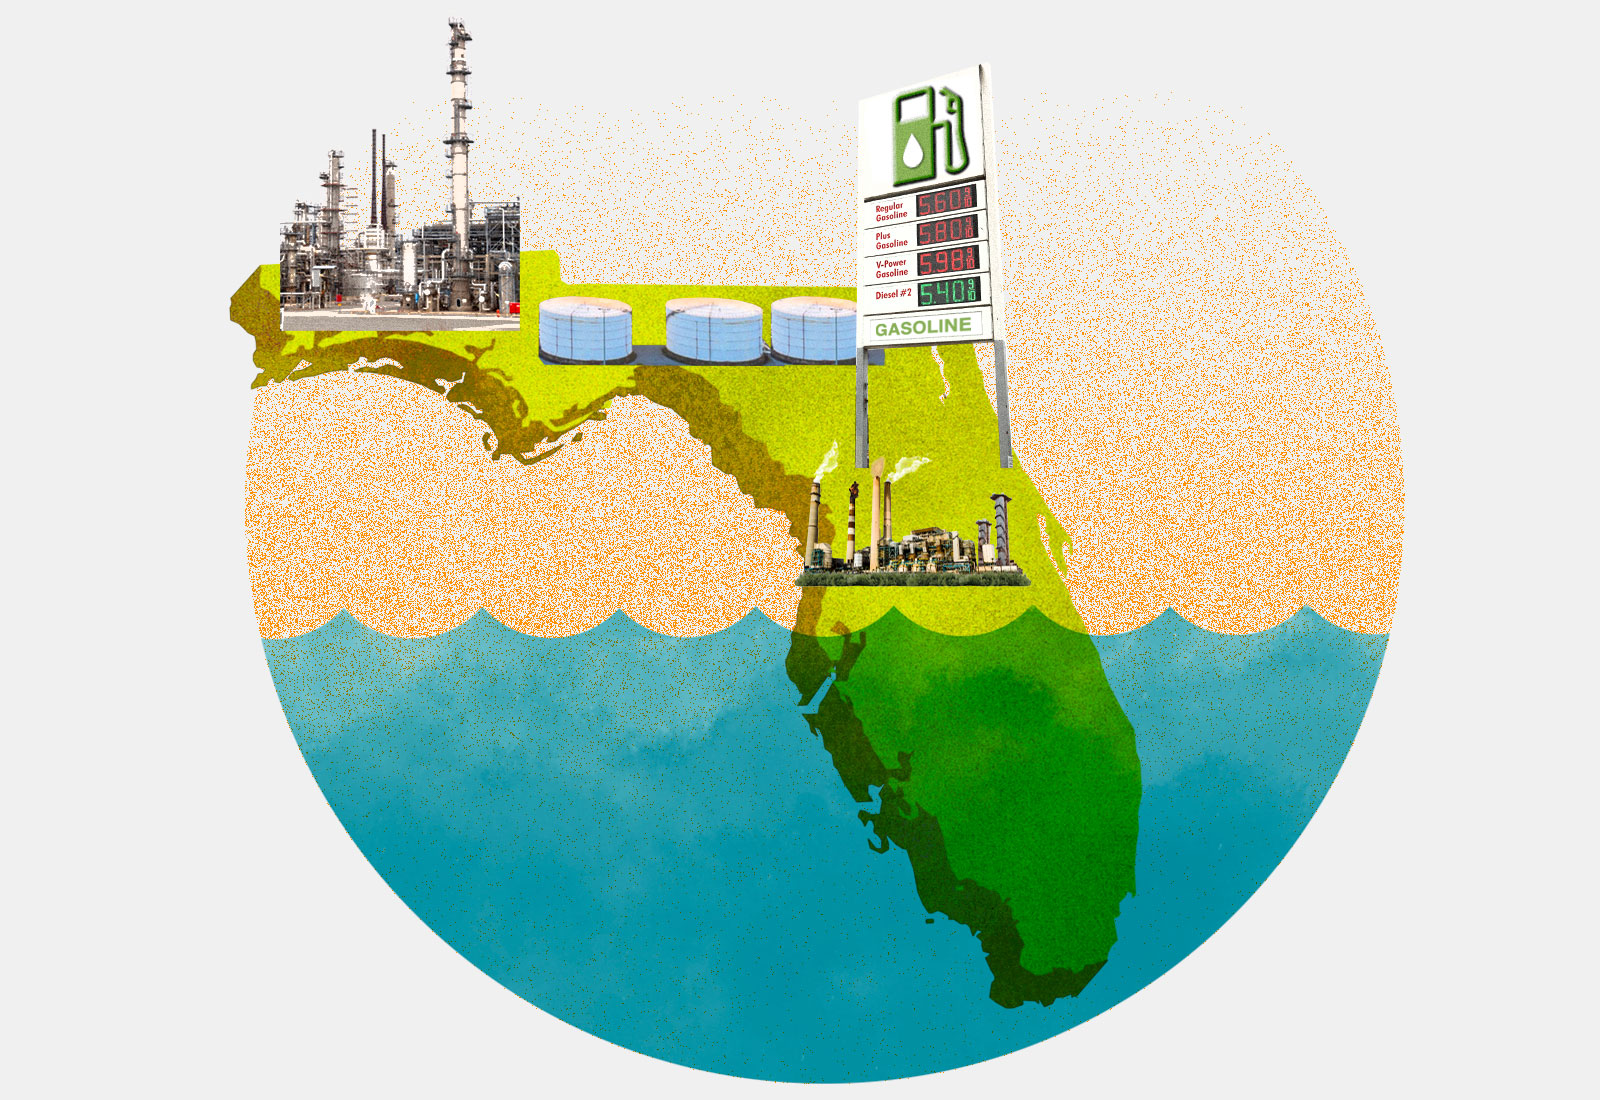 Collage: Florida, half underwater, with a gas station sign, fuel tanks, and refineries